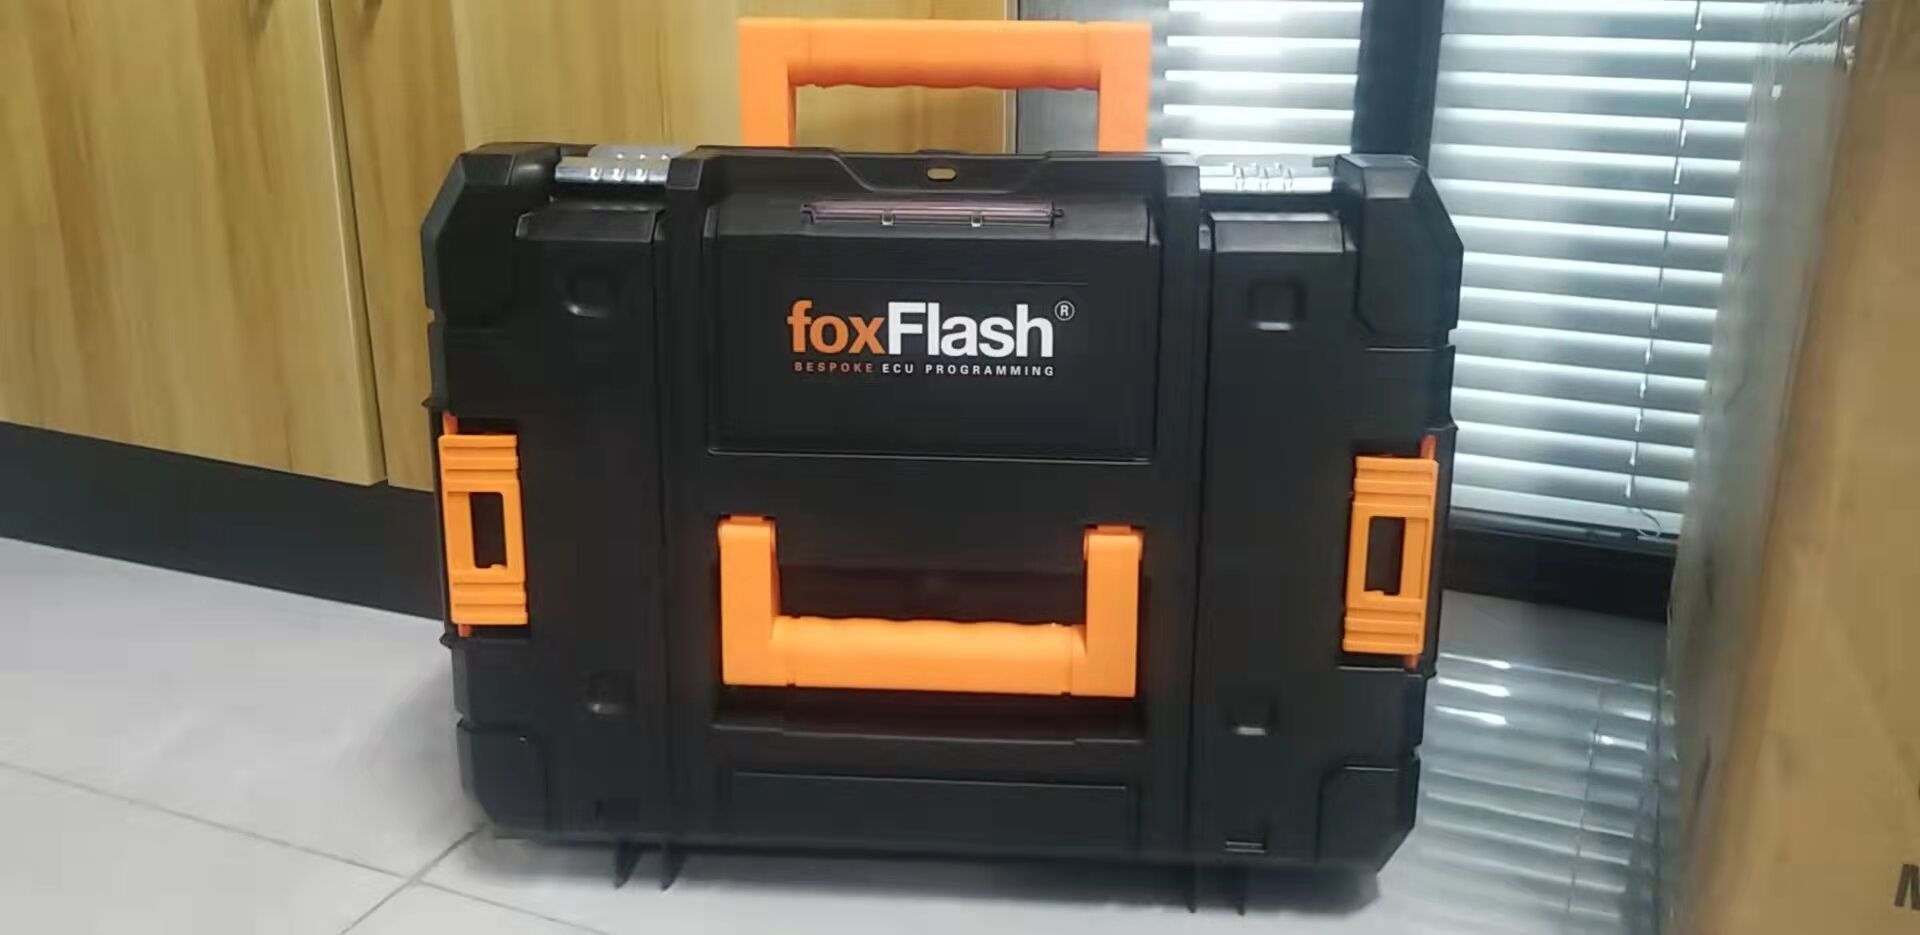 Foxflash full package dispaly